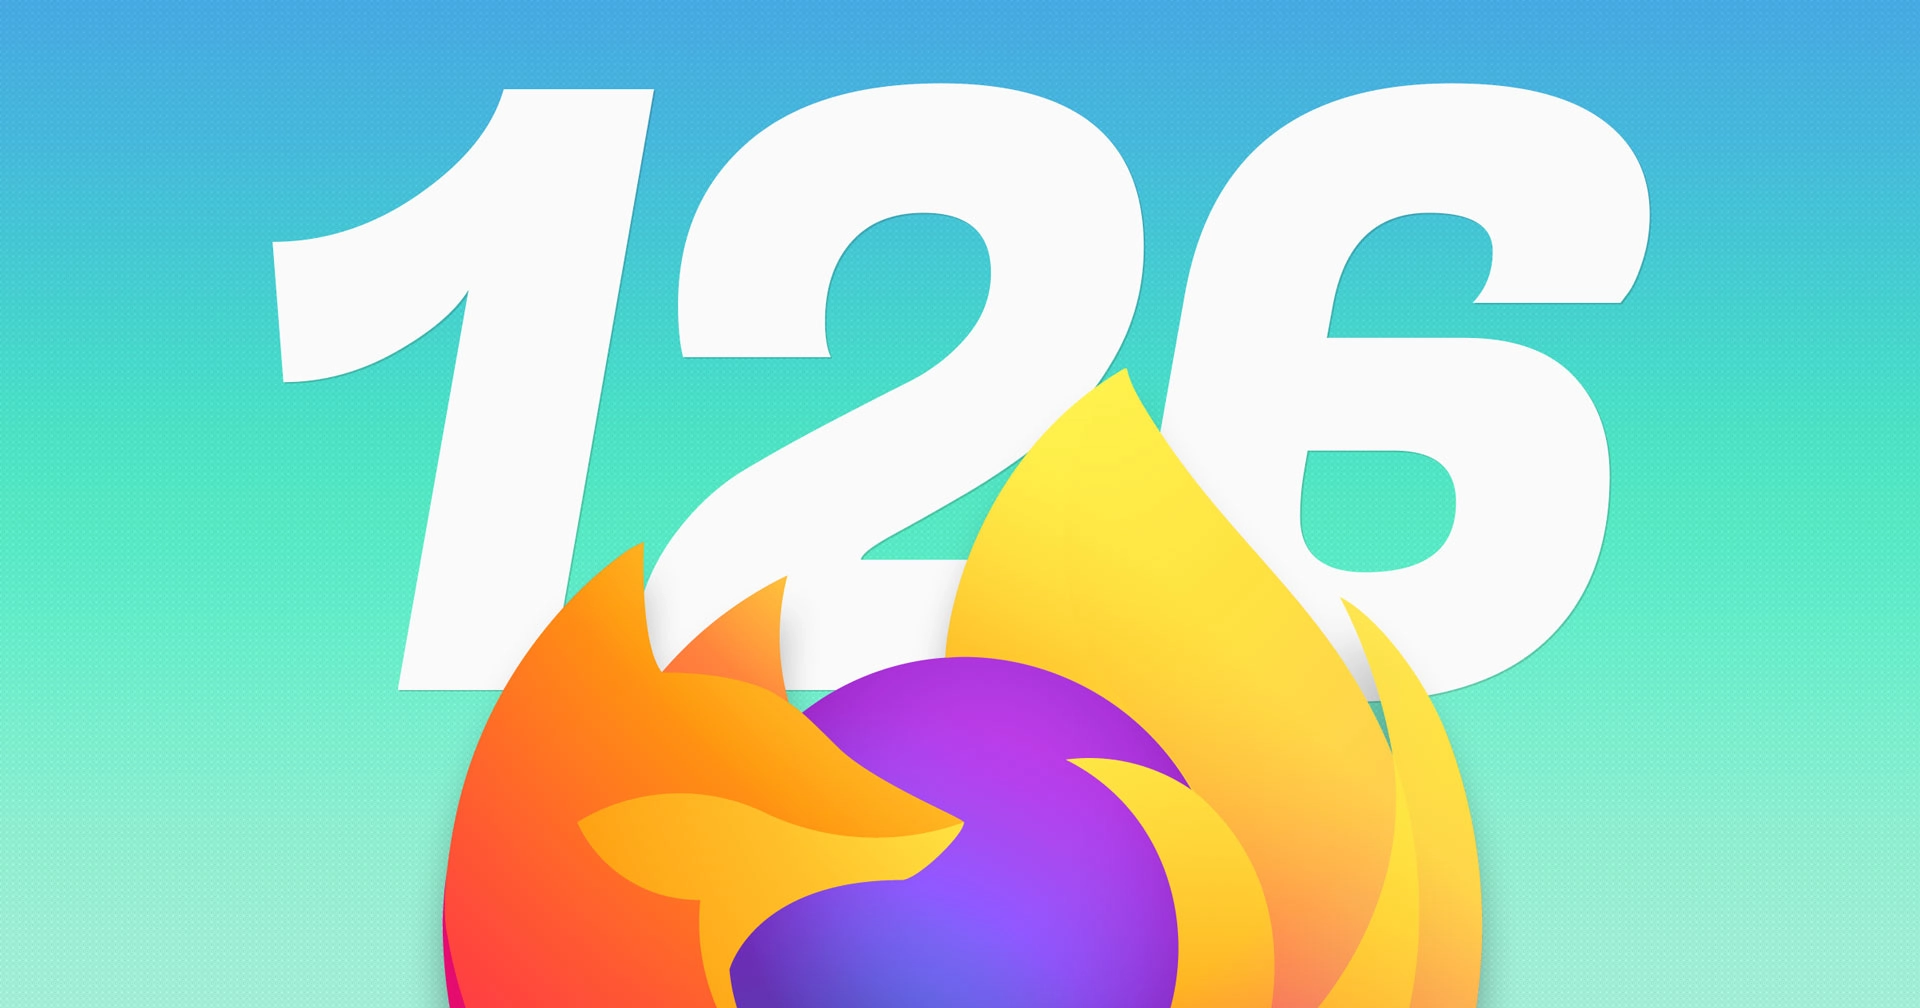 Download Now: Mozilla Firefox 126 Available for Users